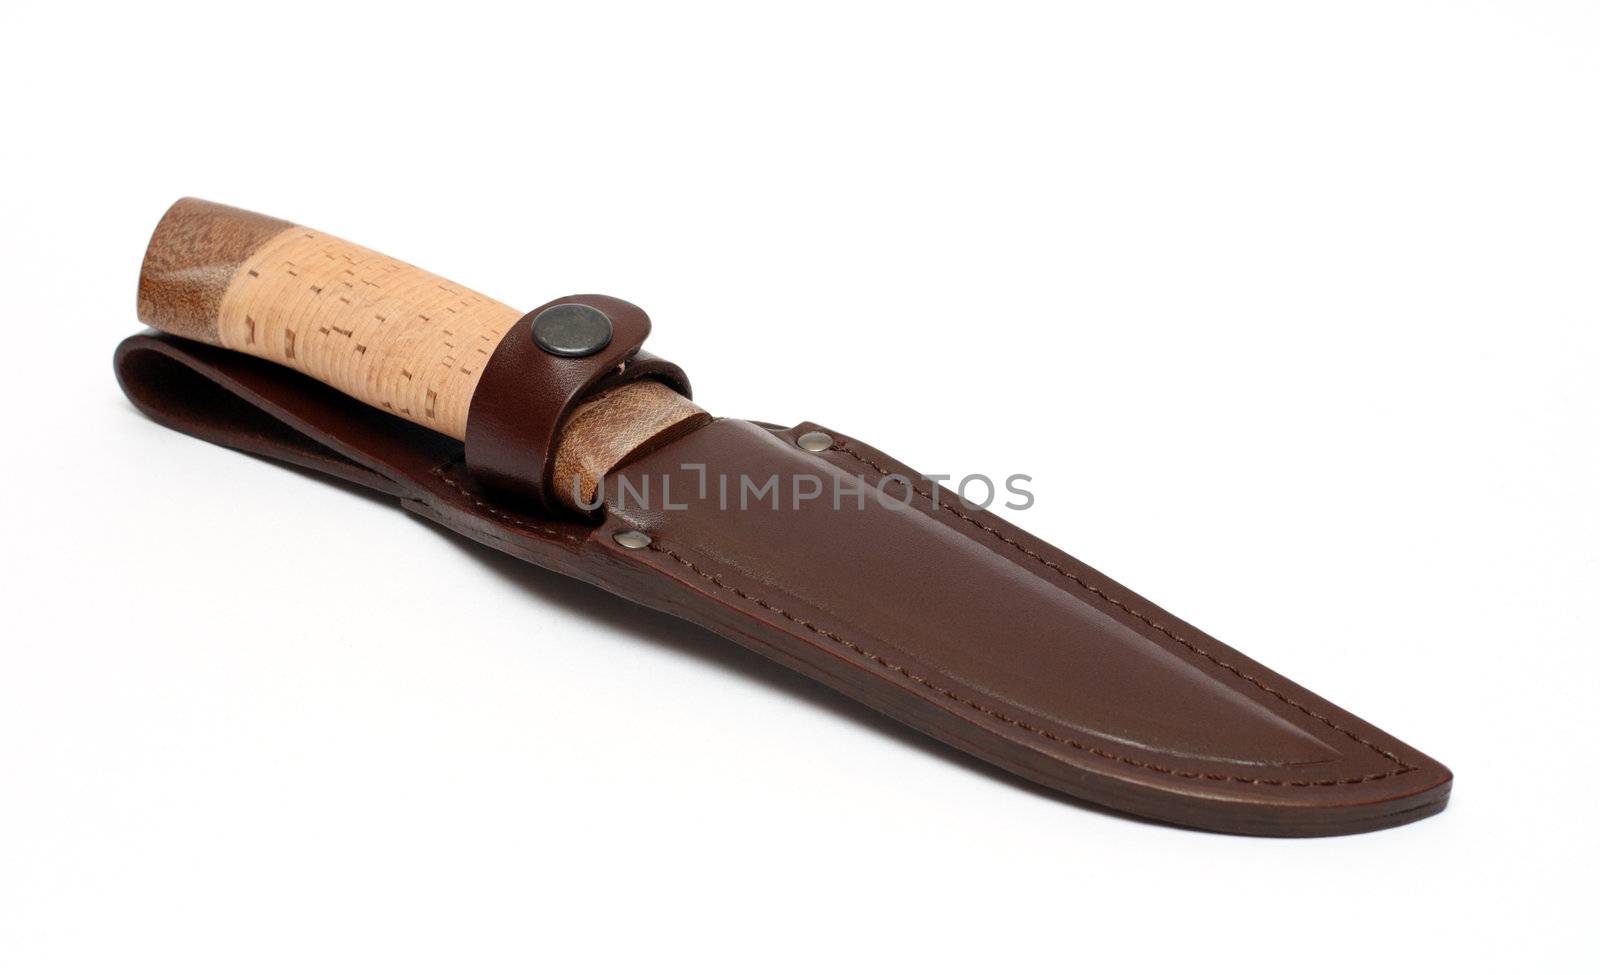 hunting knife in leather sheath isolated on white